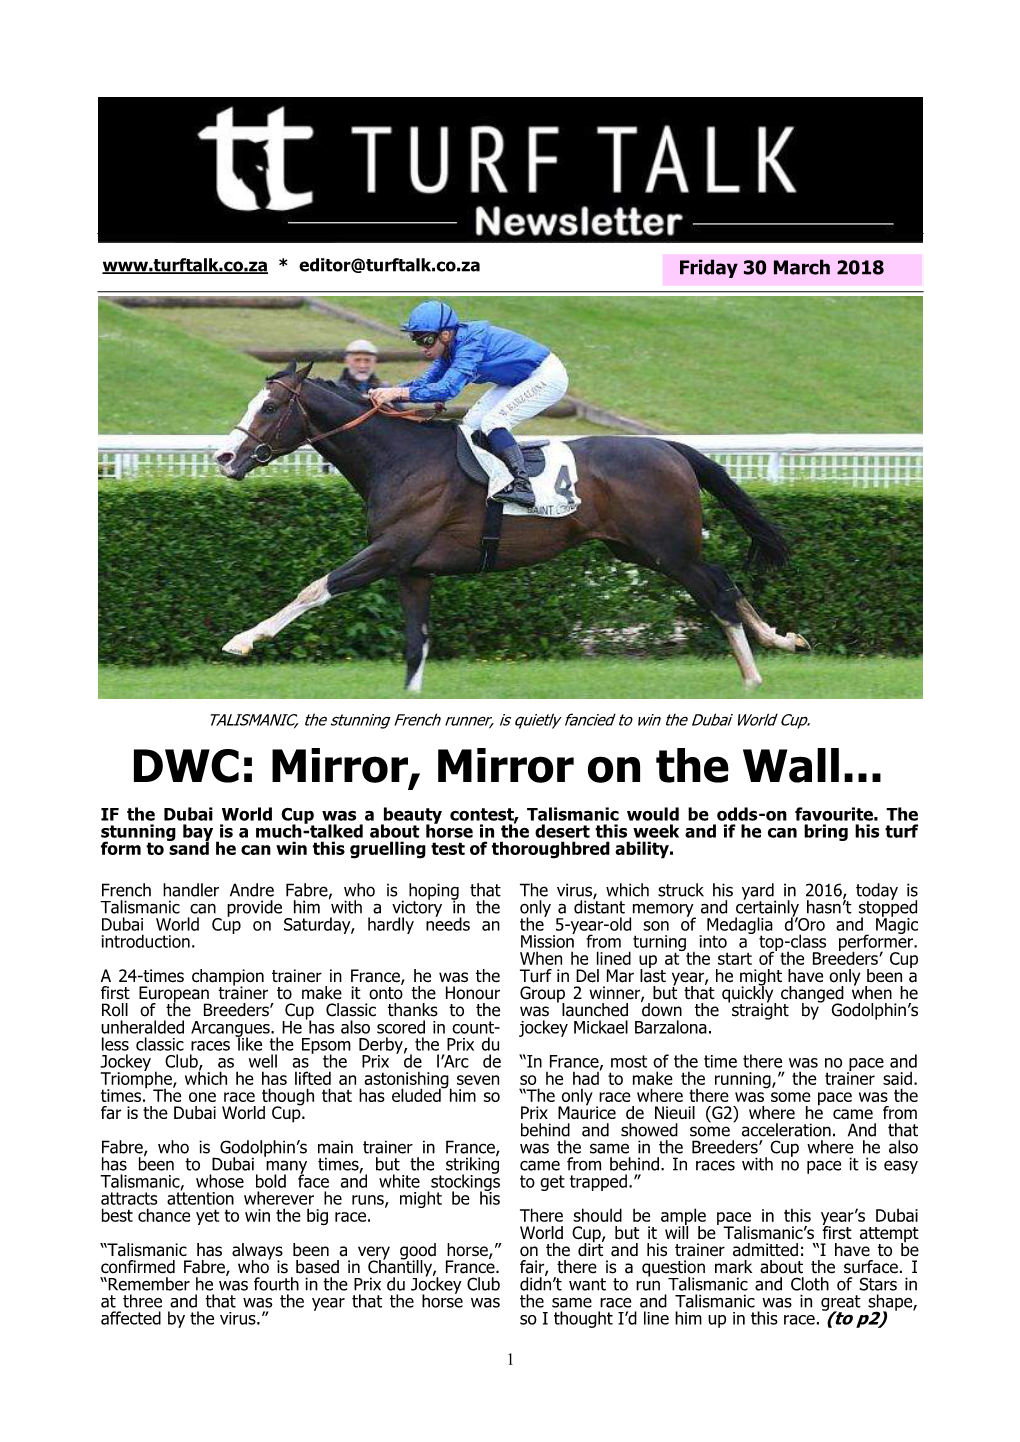 DWC: Mirror, Mirror on the Wall... IF the Dubai World Cup Was a Beauty Contest, Talismanic Would Be Odds-On Favourite